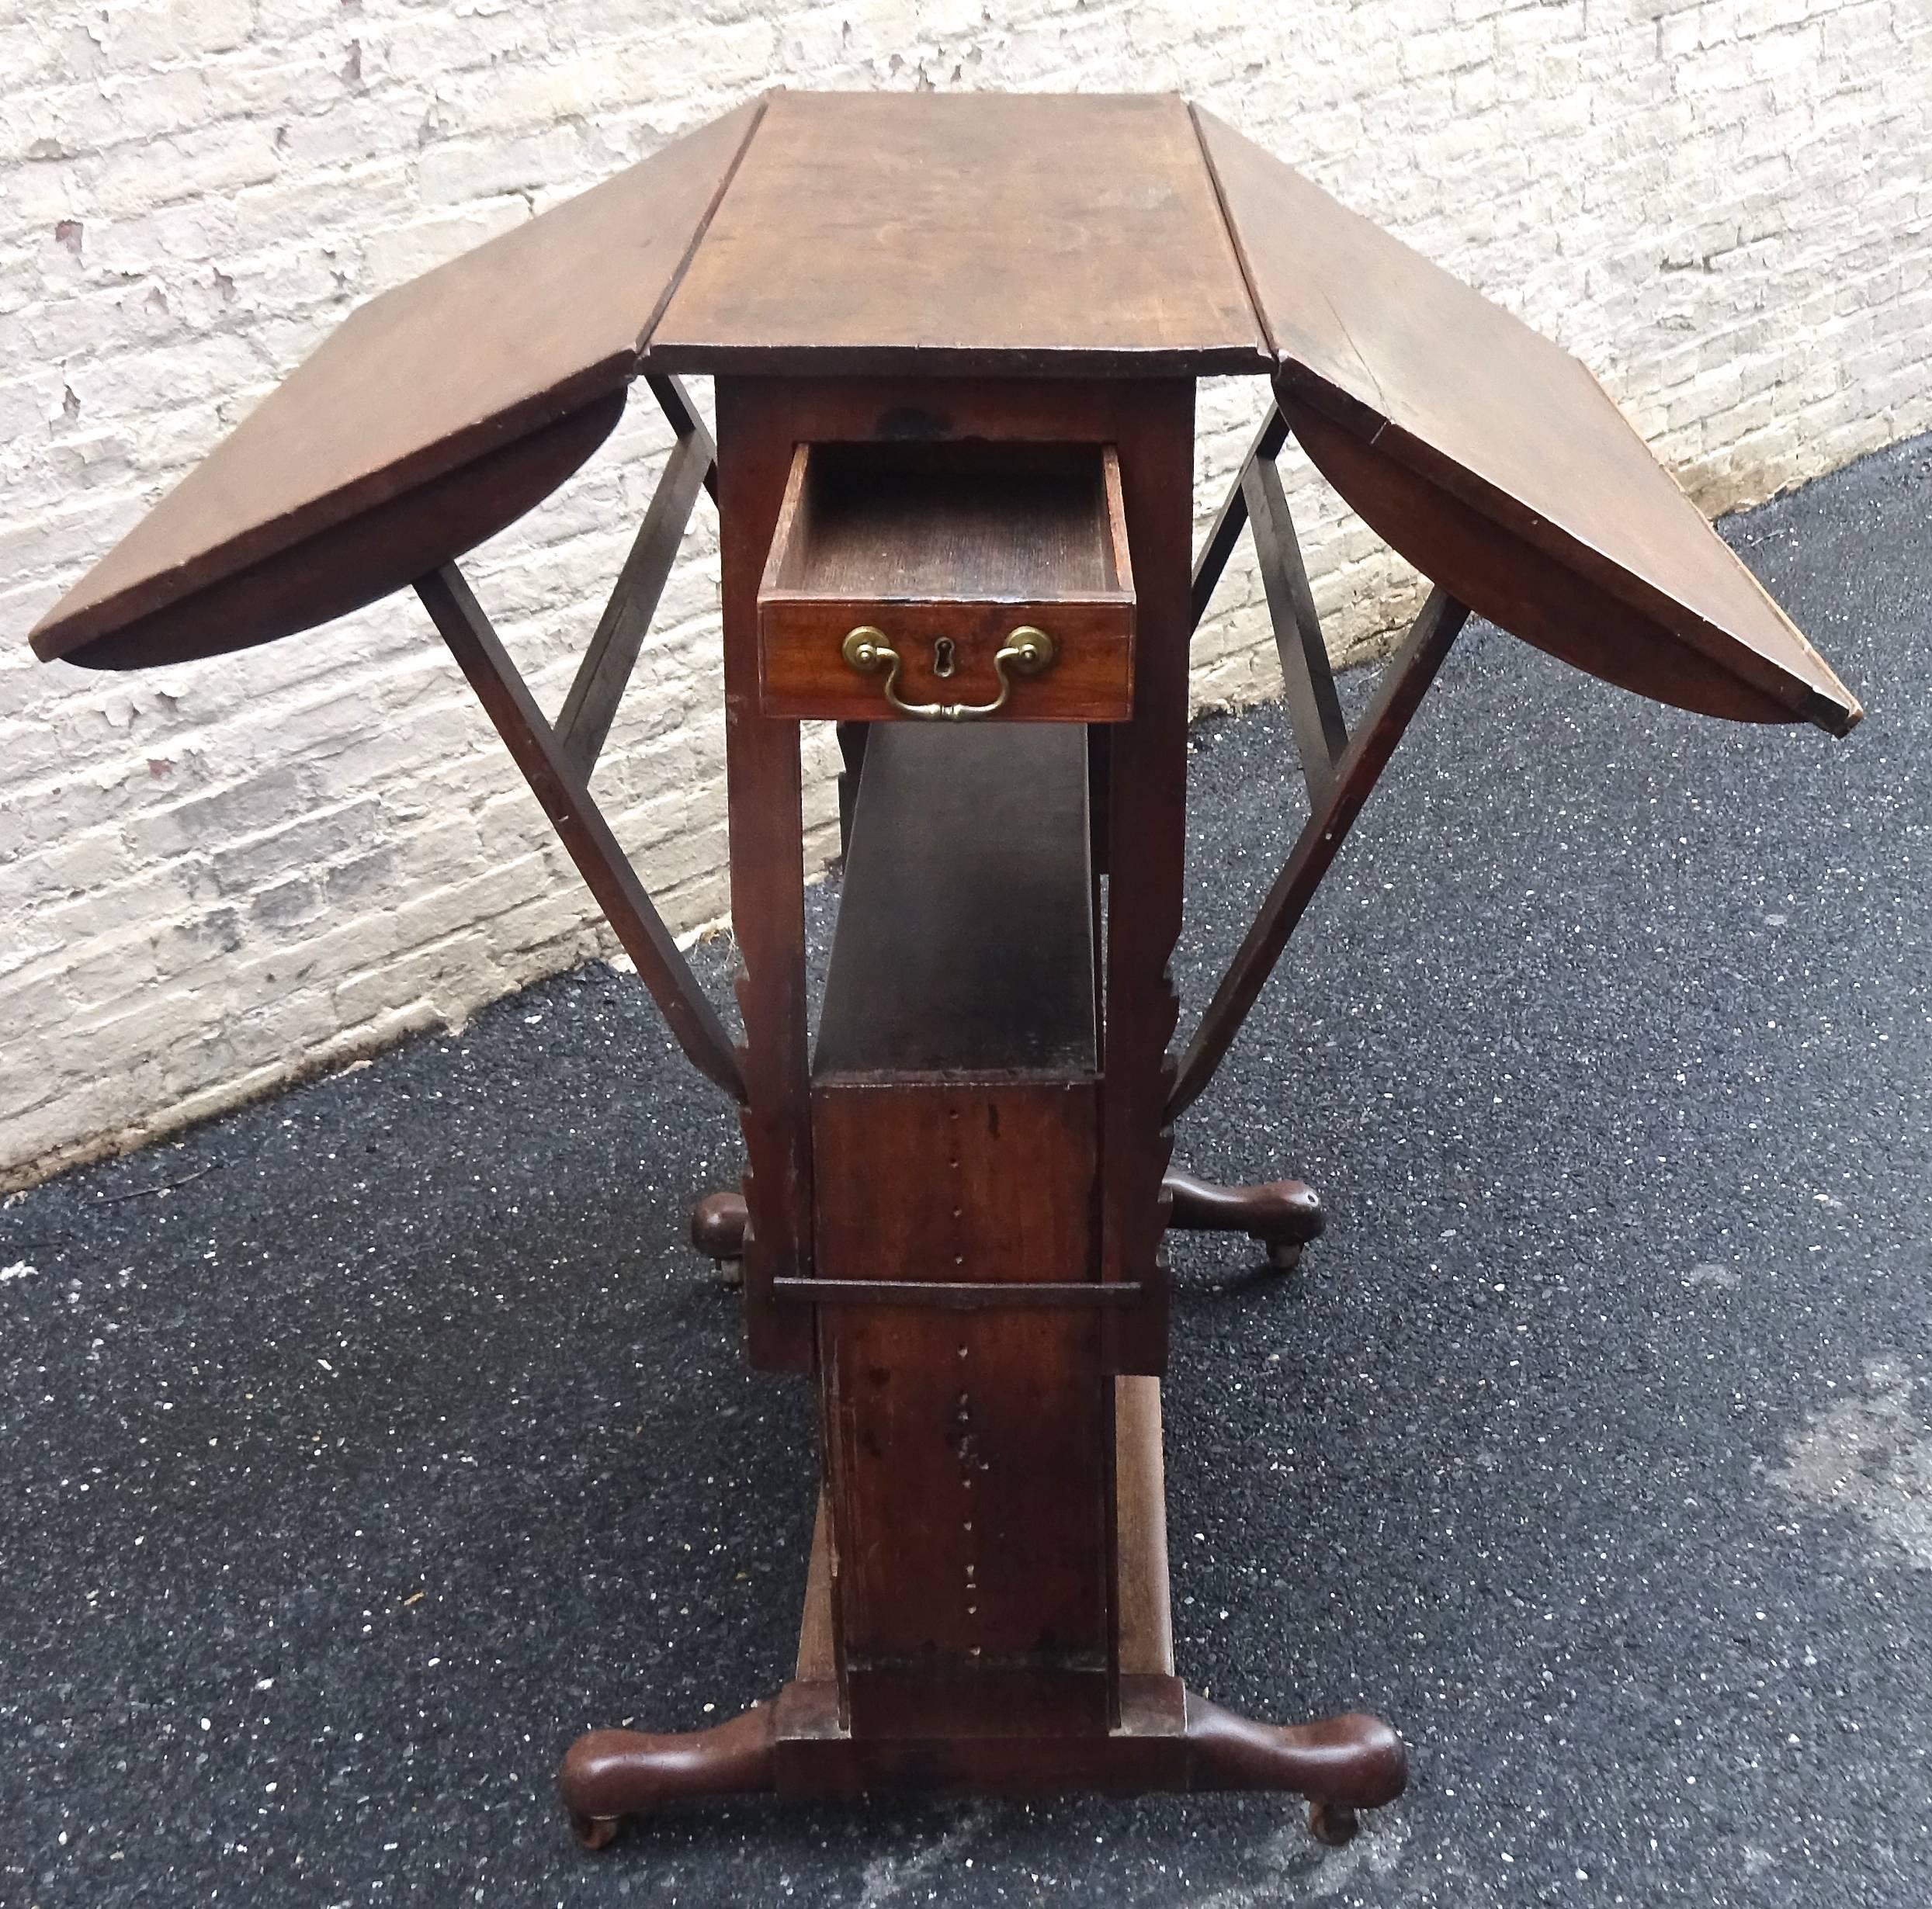 Exceptional rare early 18th century English walnut industrial drafting or architect's table. This is a 